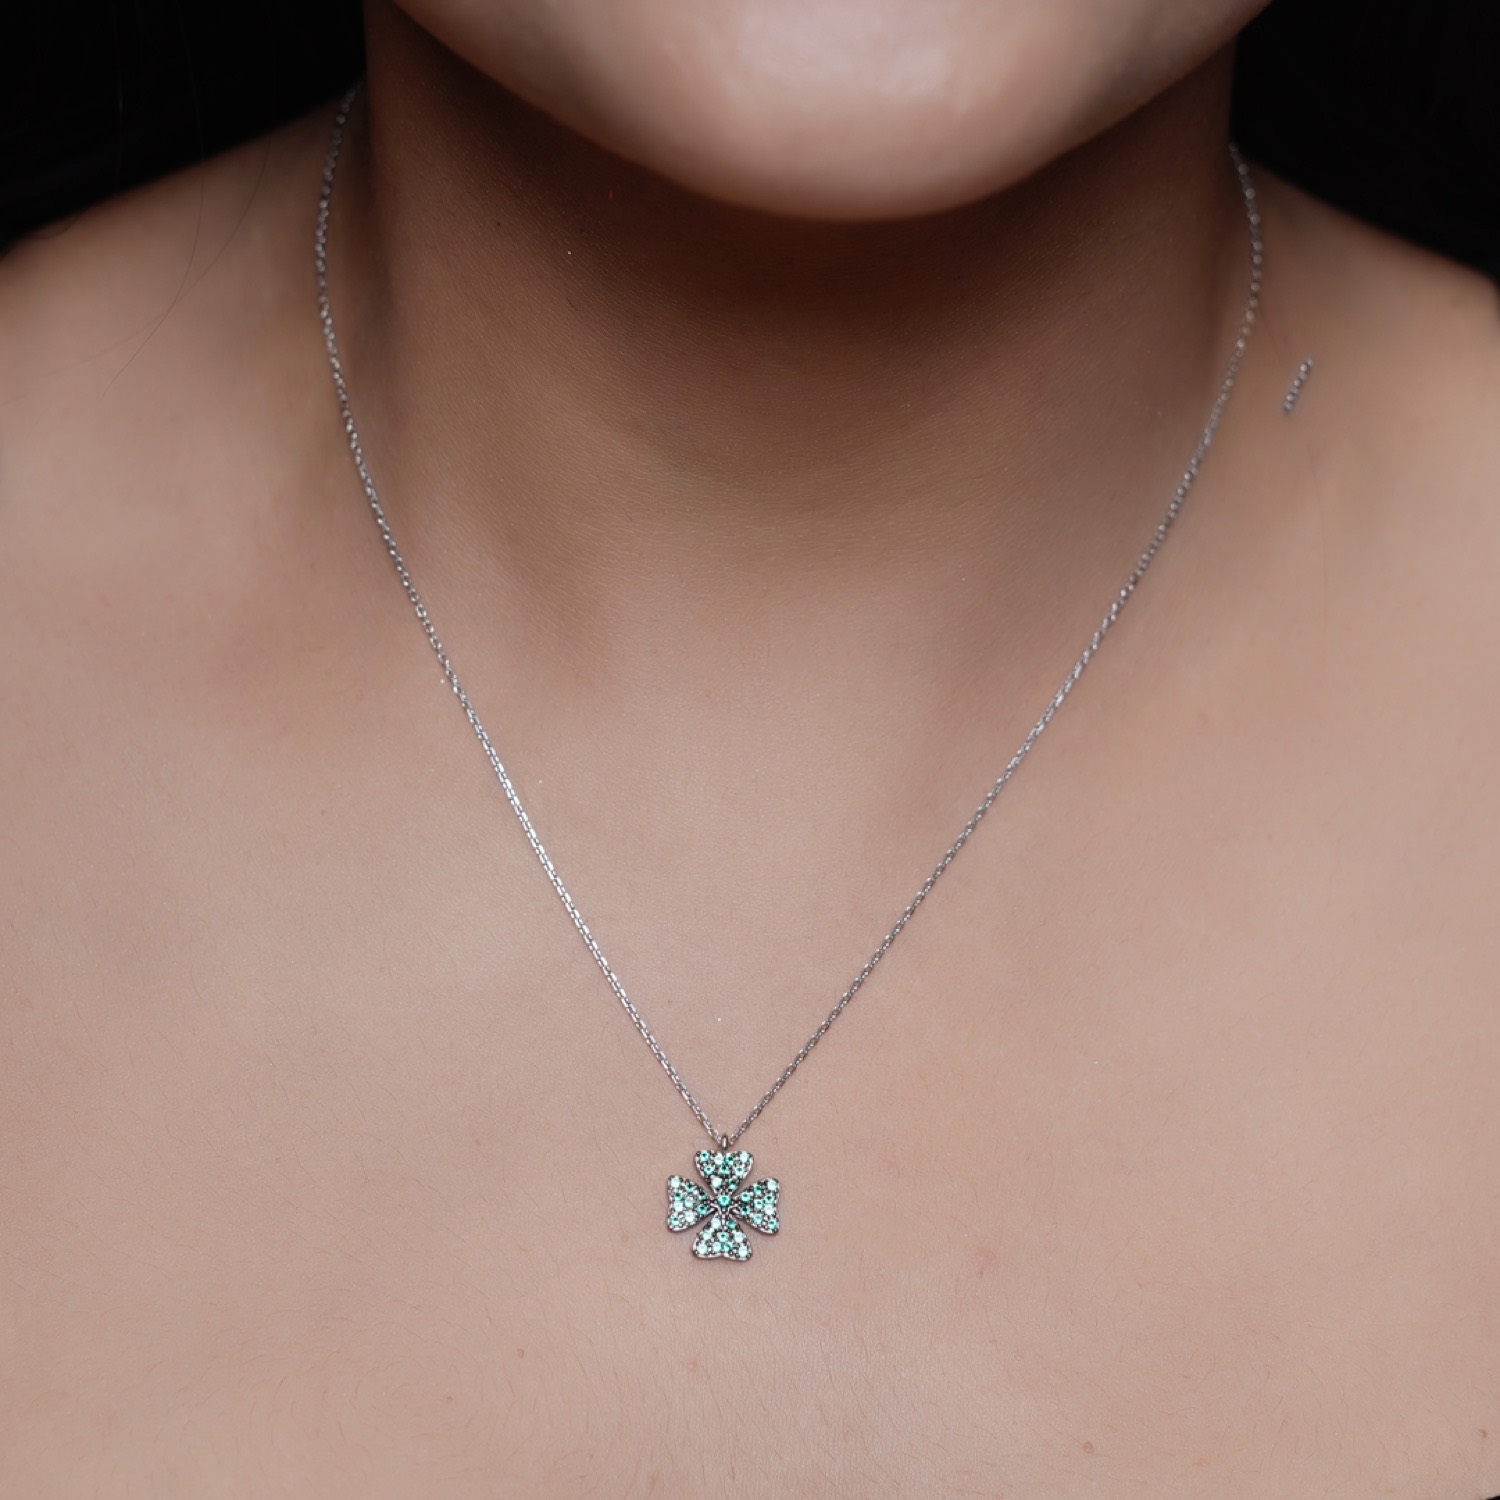 varam_chain_102022_teal_blue_color_four_clover_shaped_pendant_with_silver_chain-2